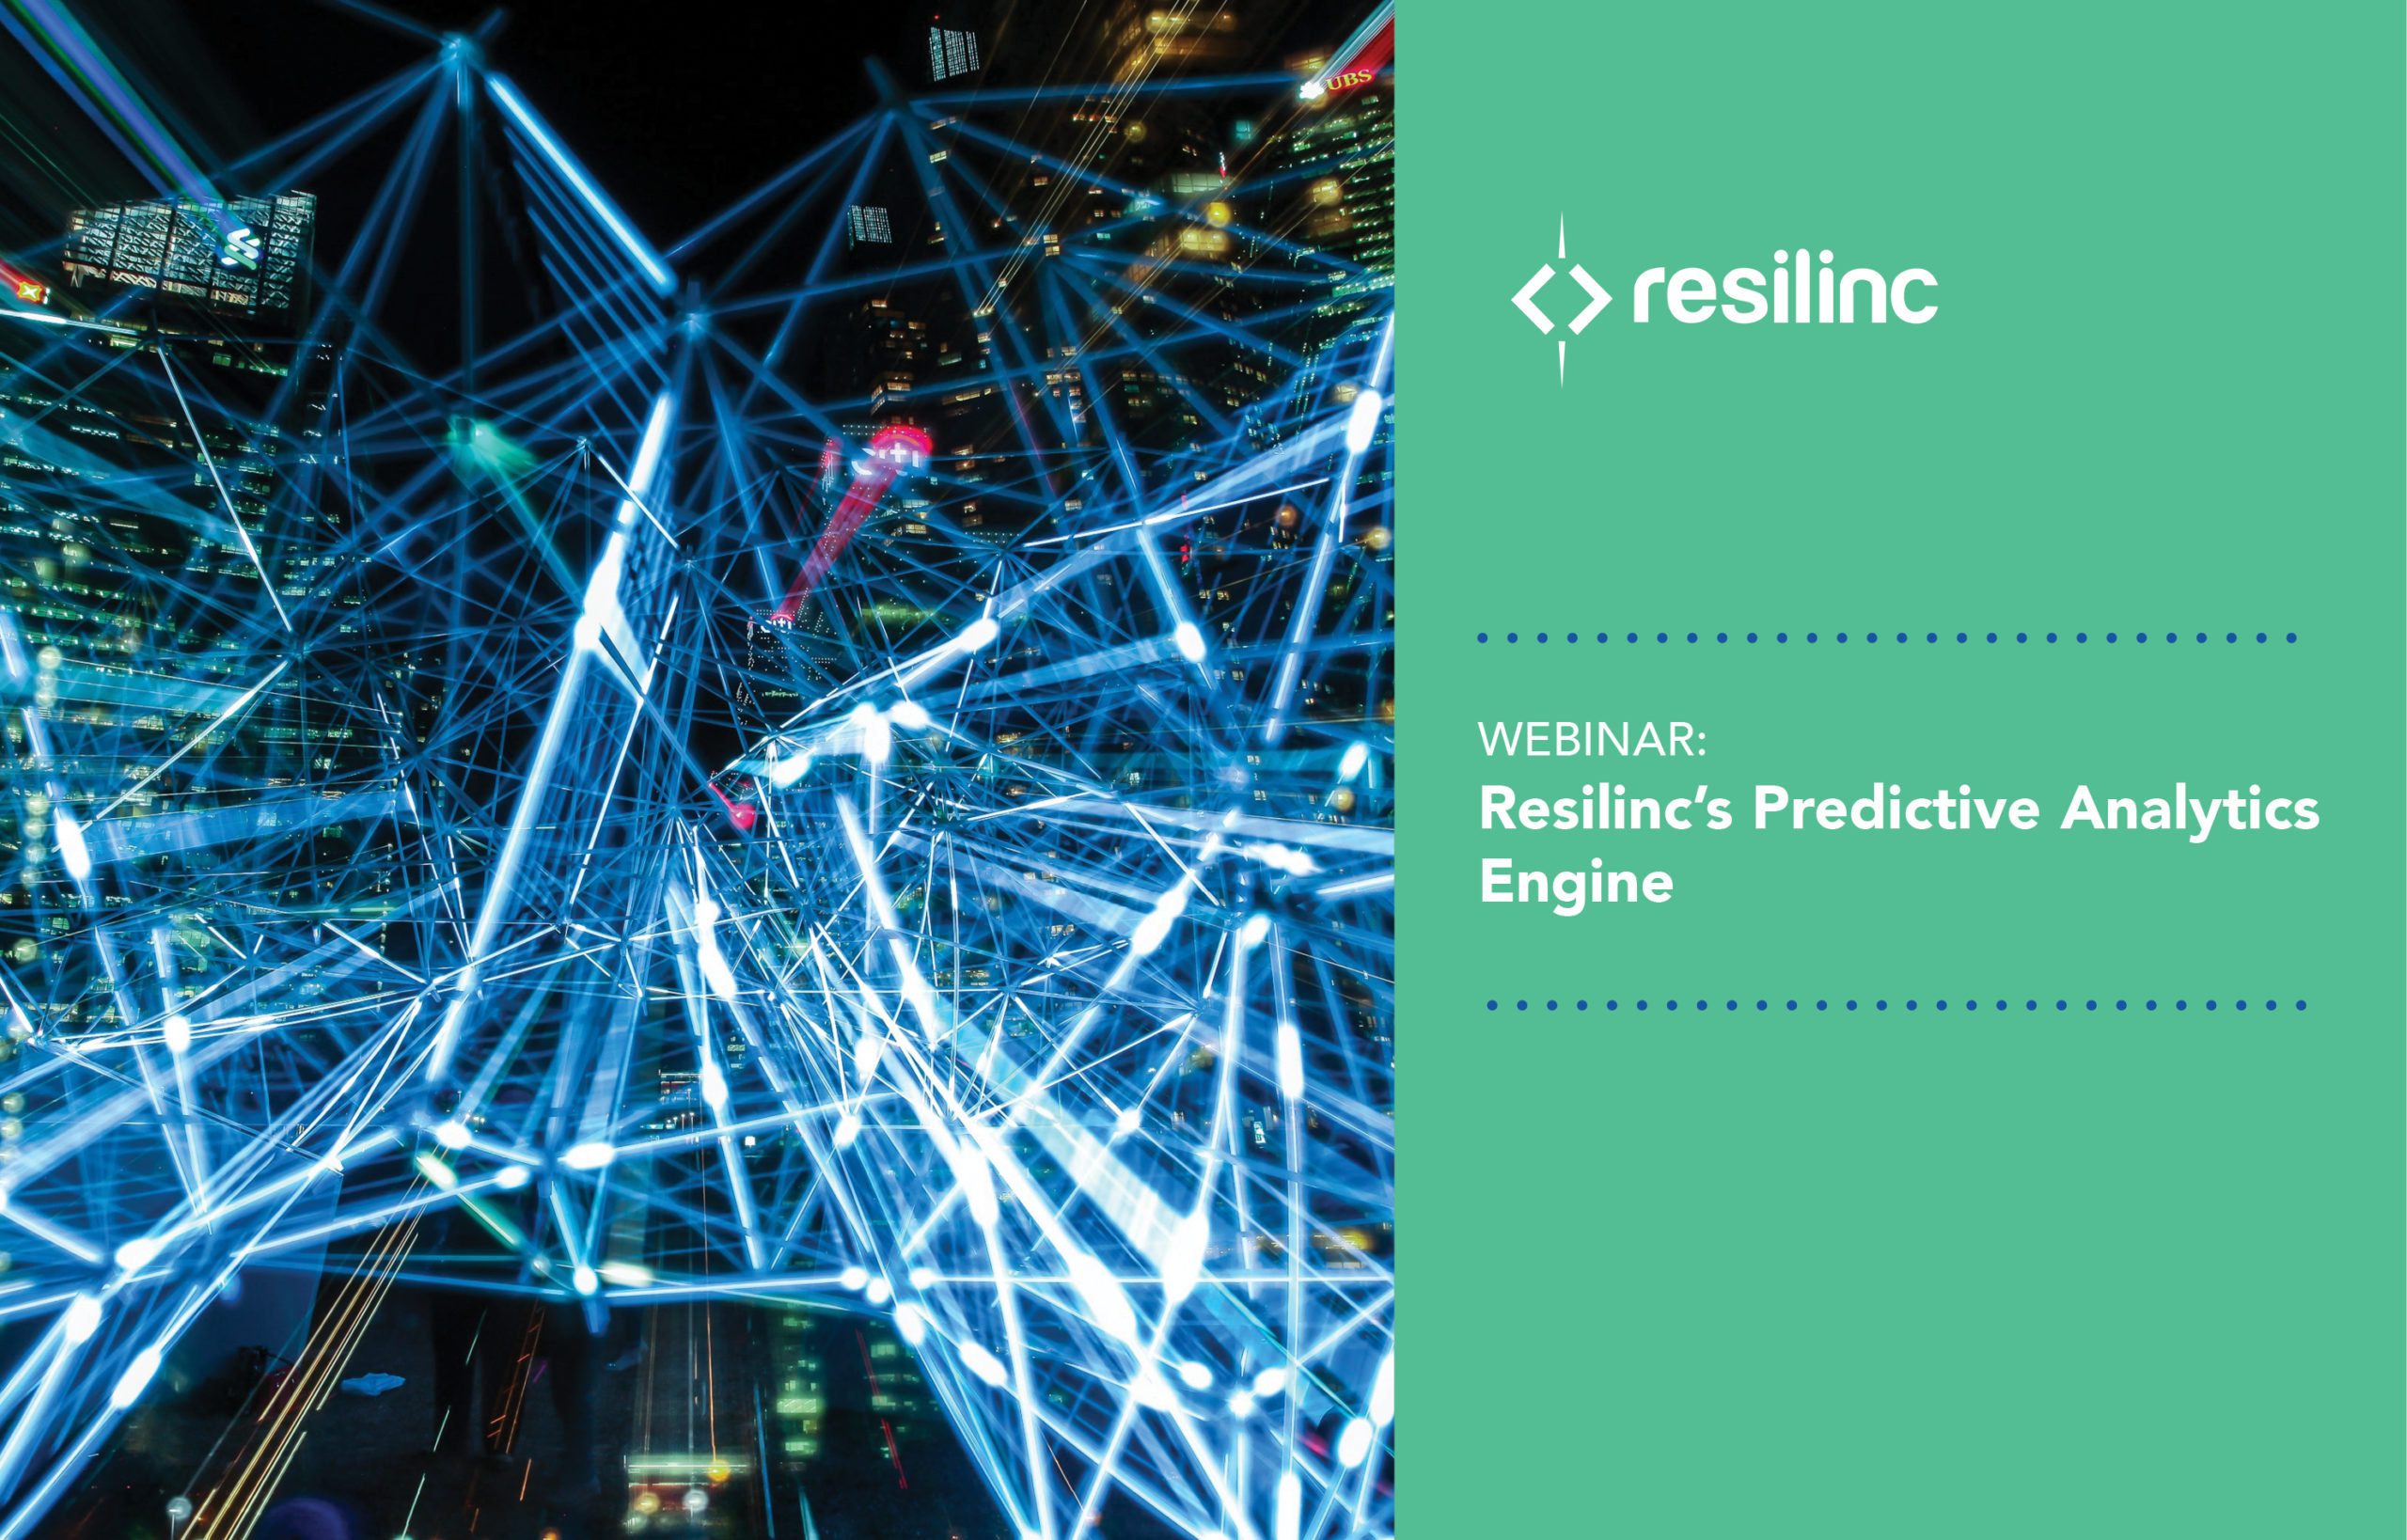 You are currently viewing Webinar: Resilinc’s Predictive Analytics Engine